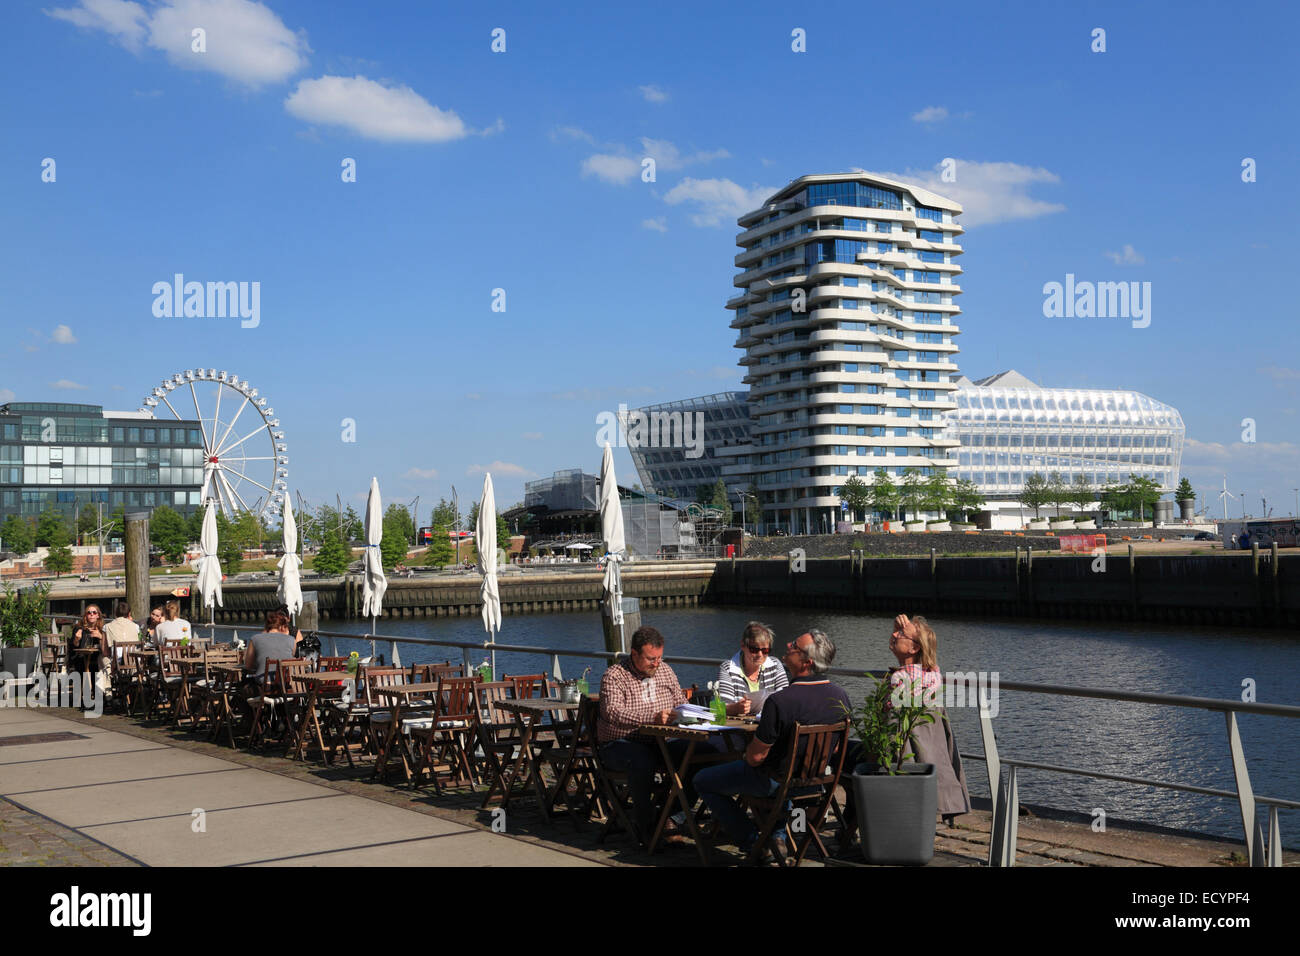 Cafe at Dalmannkai, view to Marco  Polo Tower and Unilever building, Hafencity, Hamburg, Germany, Europe Stock Photo